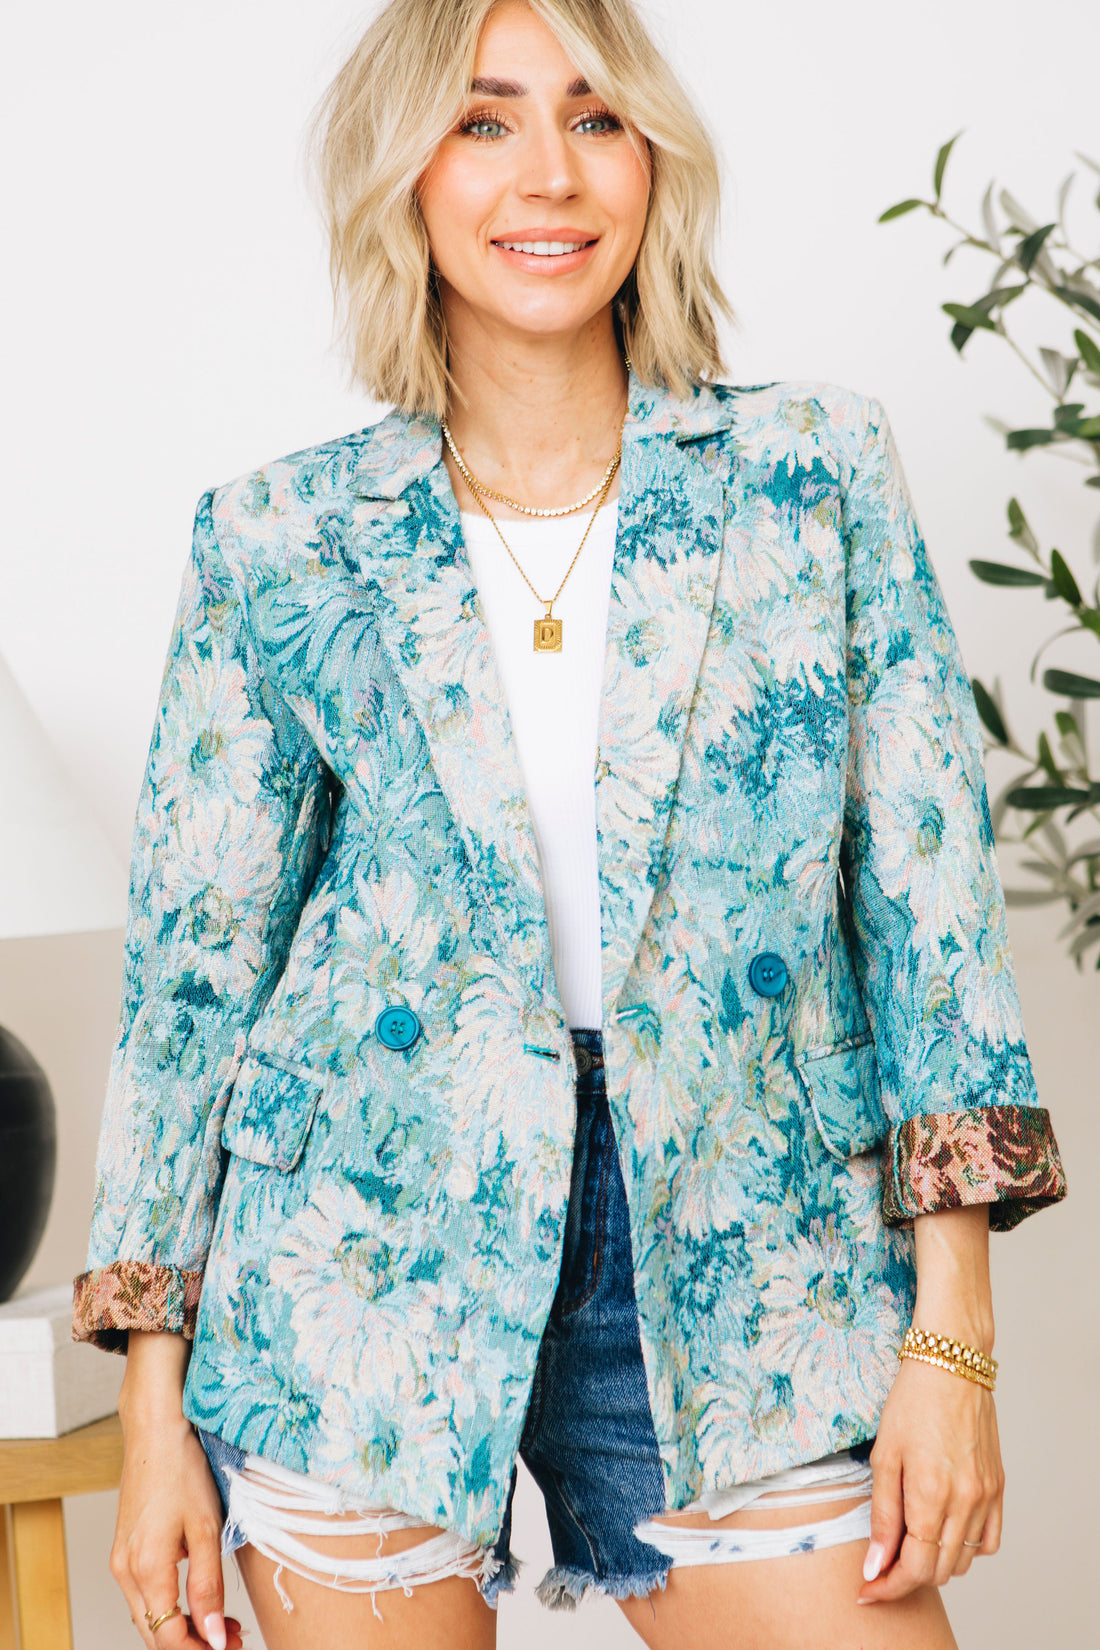 Ivy Exclusive - My Nanas Couch Couture Blazer Blue (S-3XL)